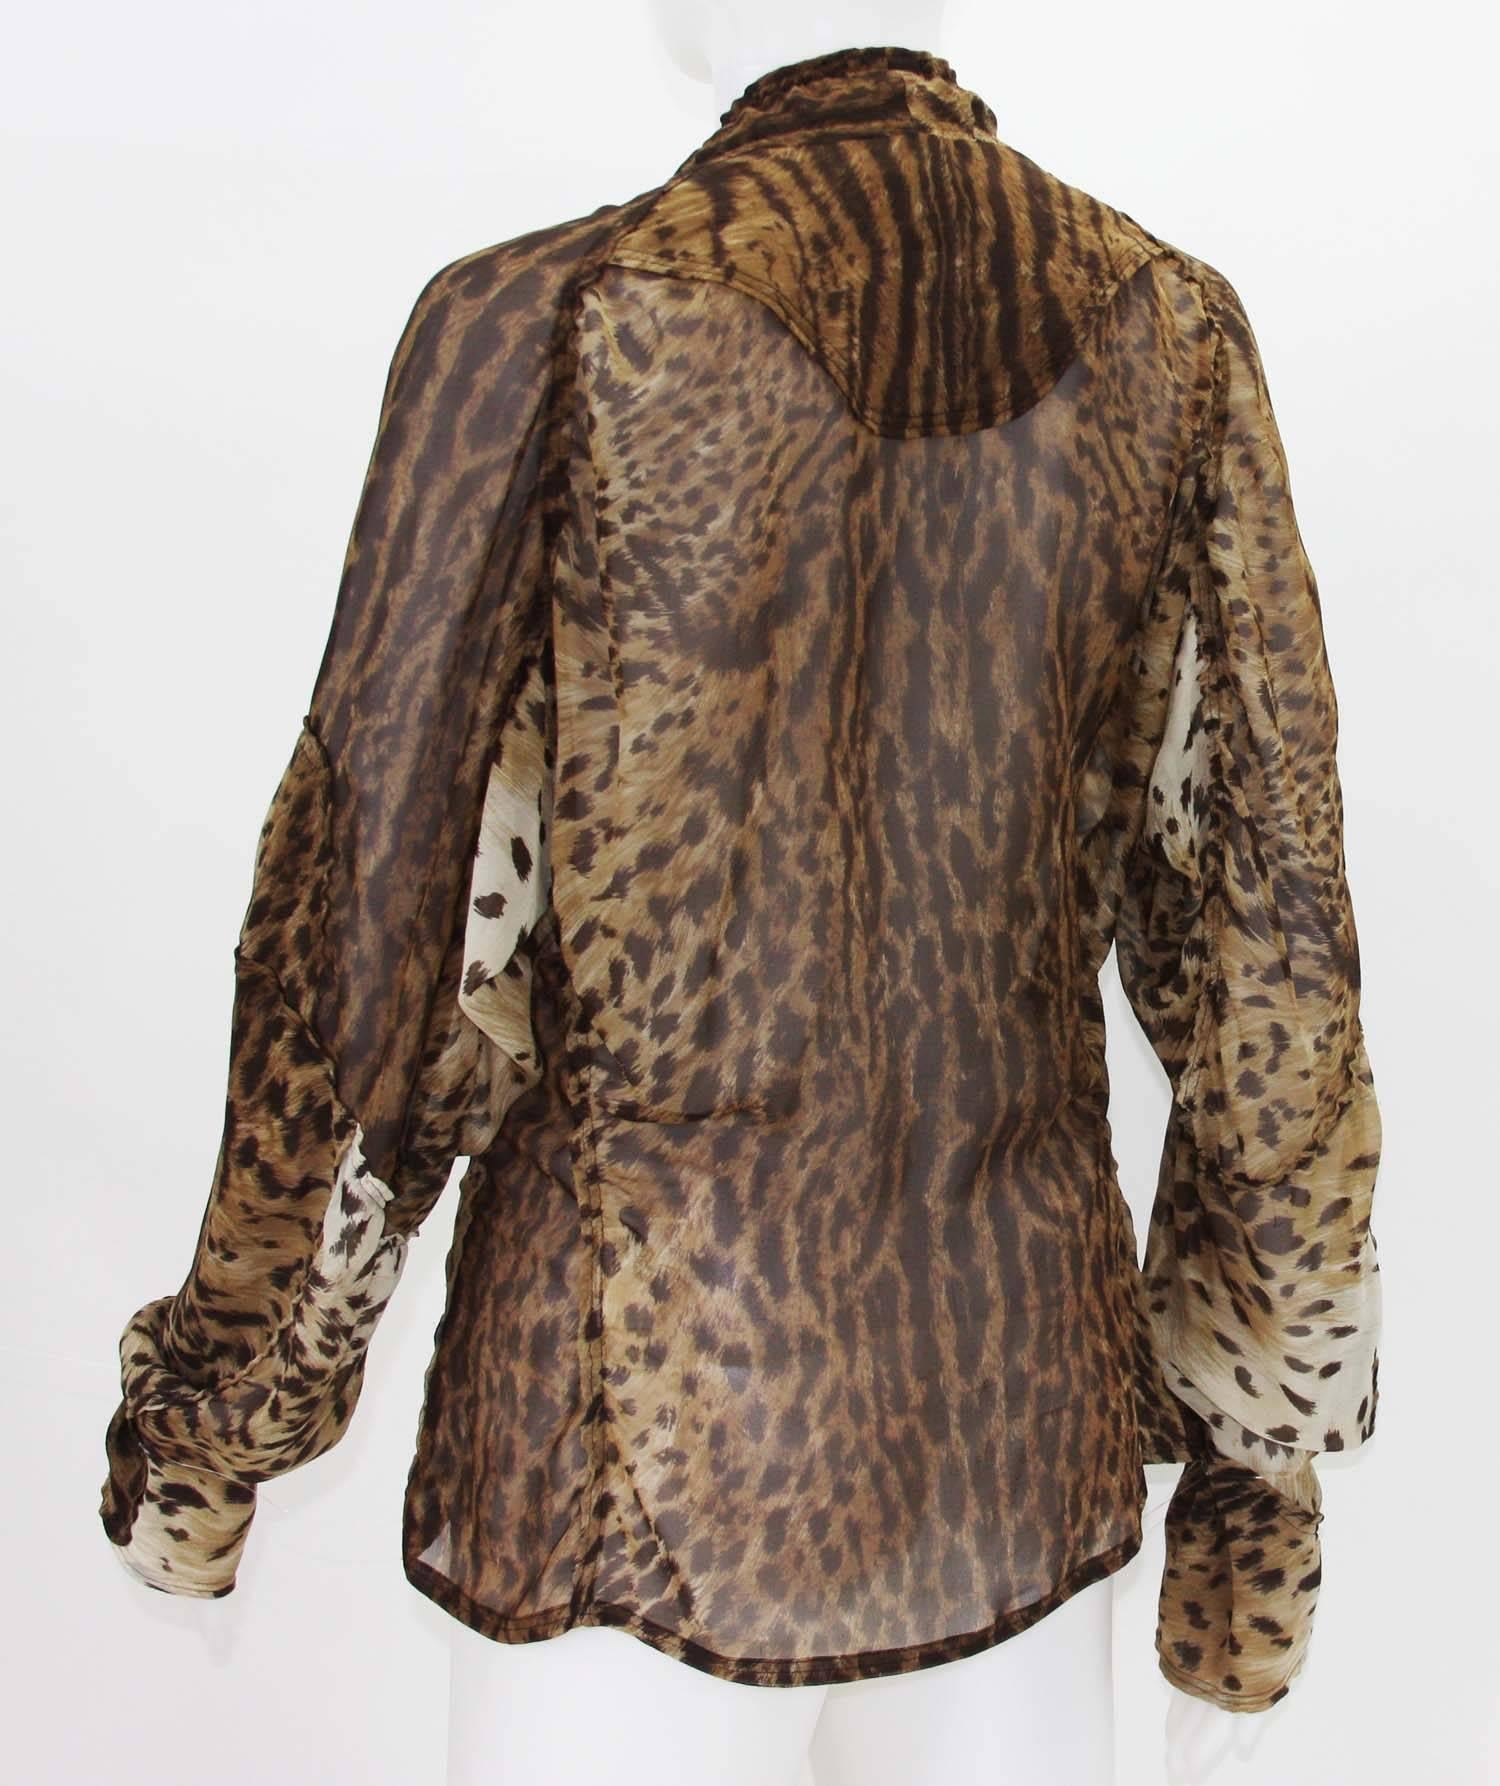 Tom Ford for Yves Saint Laurent S/S 2002 Safari Collection Leopard Silk Top F 38 For Sale 1